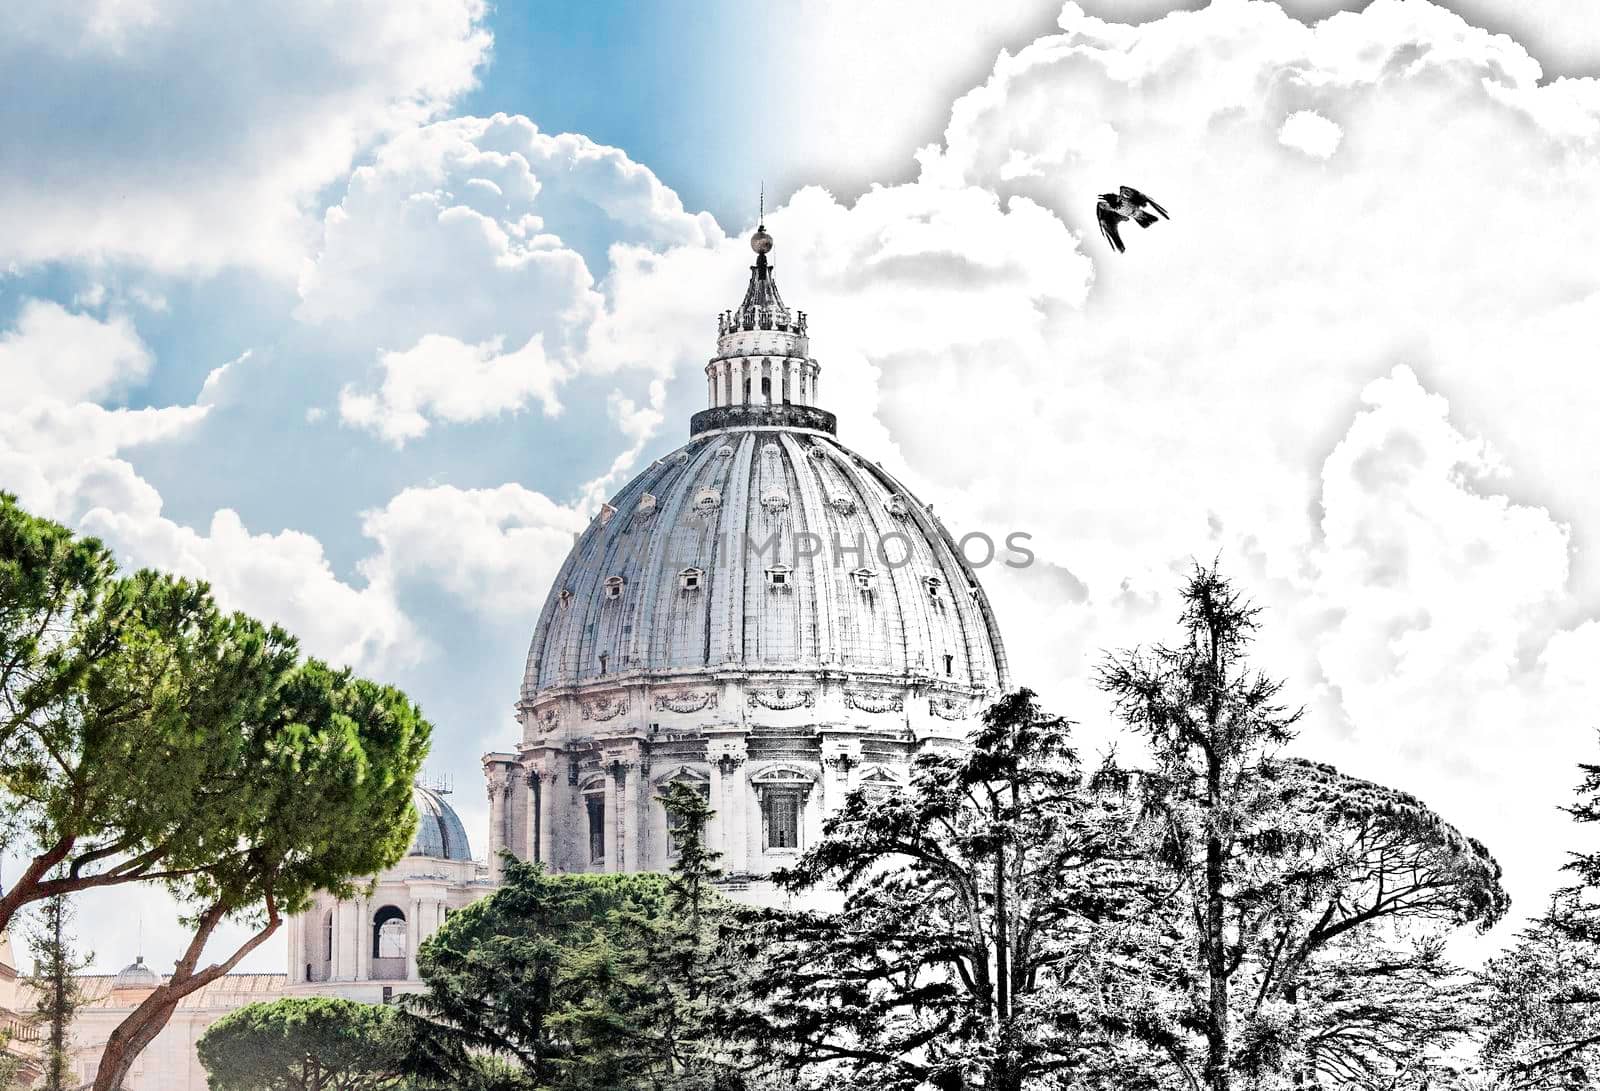 Saint Peter's Basilica in Rome between drawing and reality by raphtong